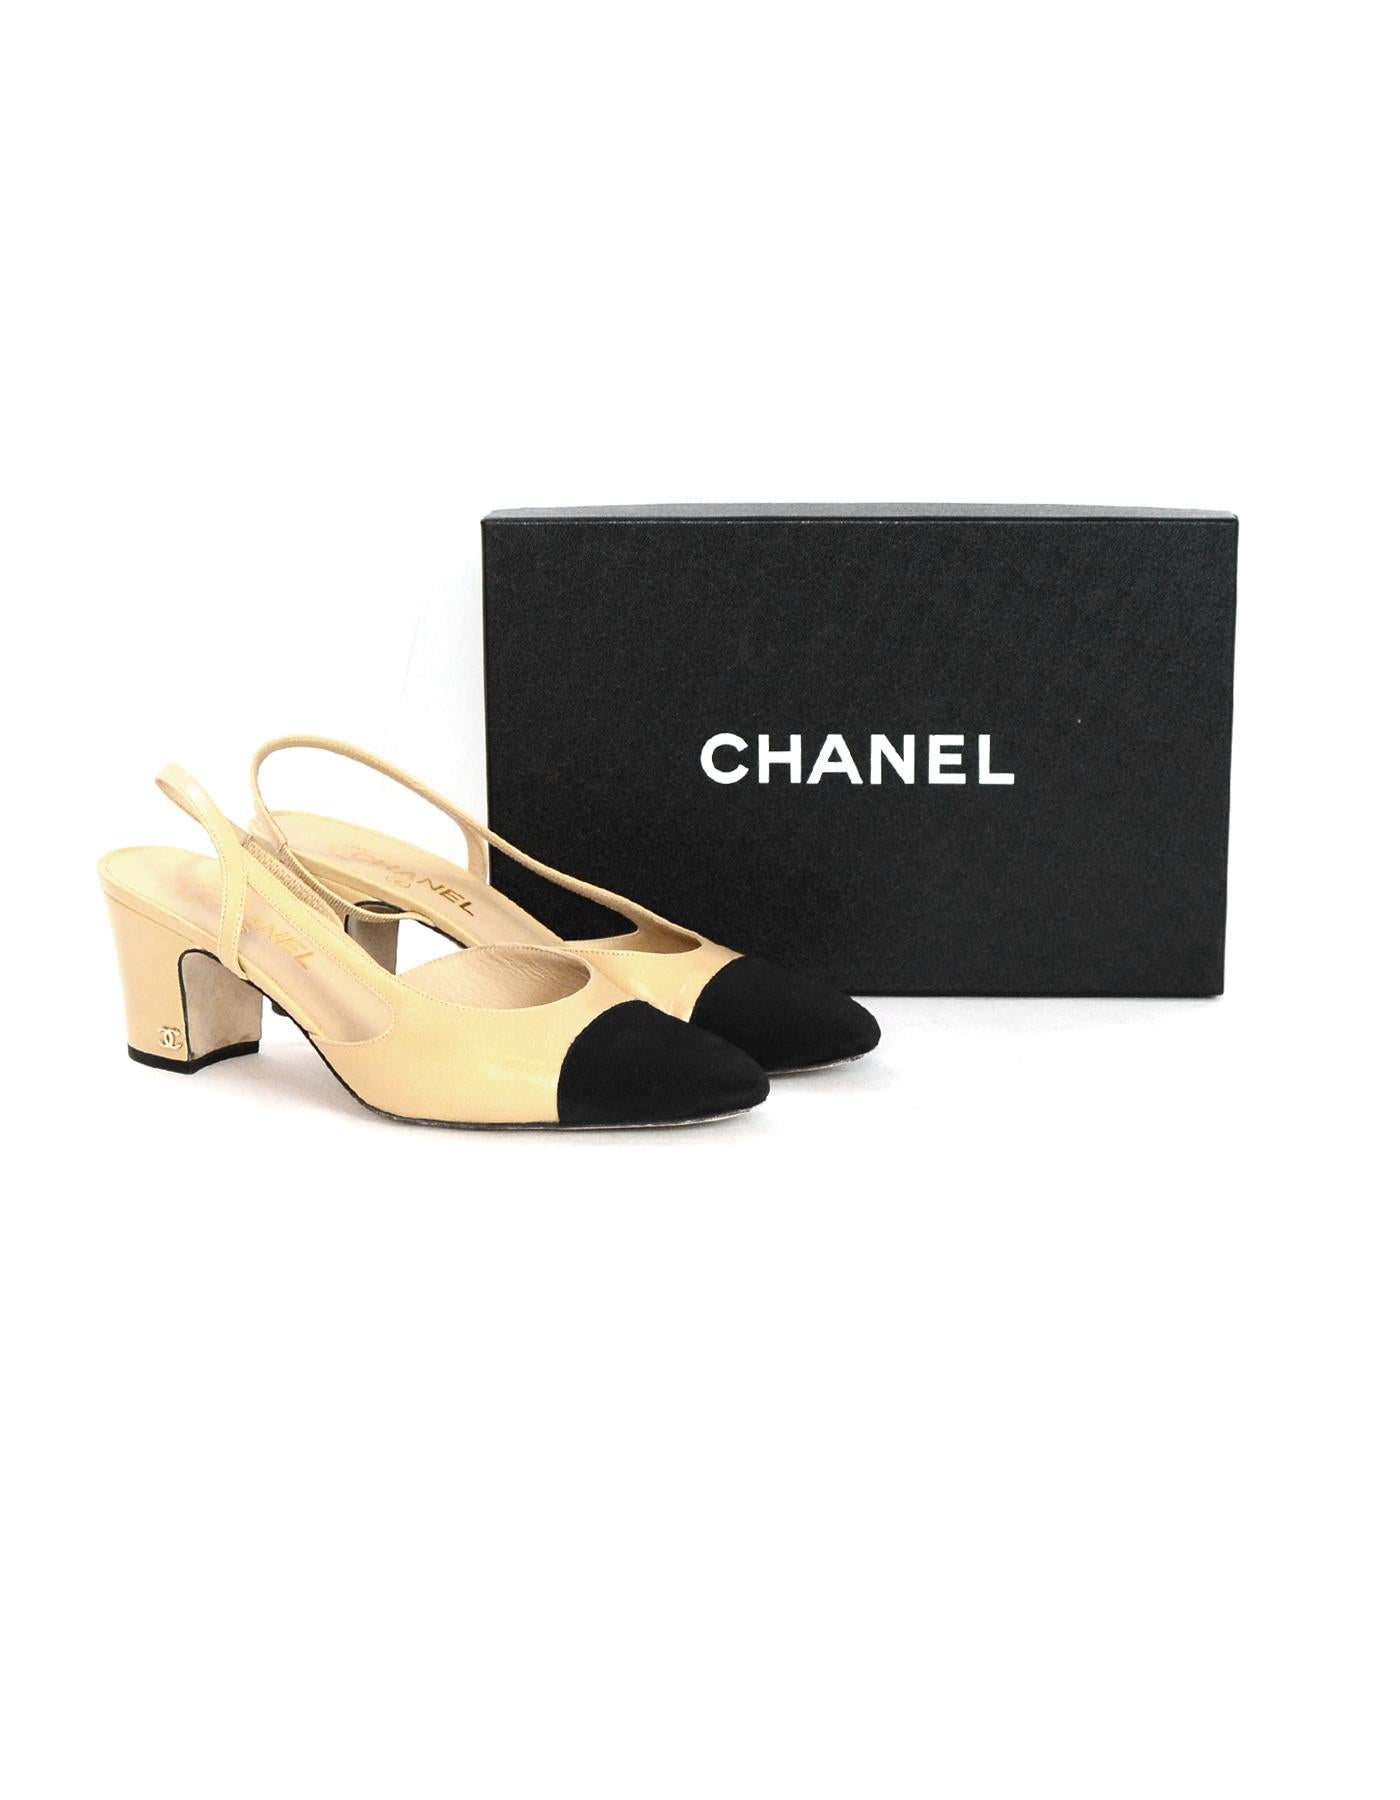 Chanel Tan Leather Black Grosgrain Cap Toe Slingback Heels Sz 40.5

Made In: Italy
Year of Production: 2016
Color: Tan/black
Hardware: Goldtone
Materials: Leather, grosgrain, and metal
Closure/Opening:  Sling back
Overall Condition: Very good